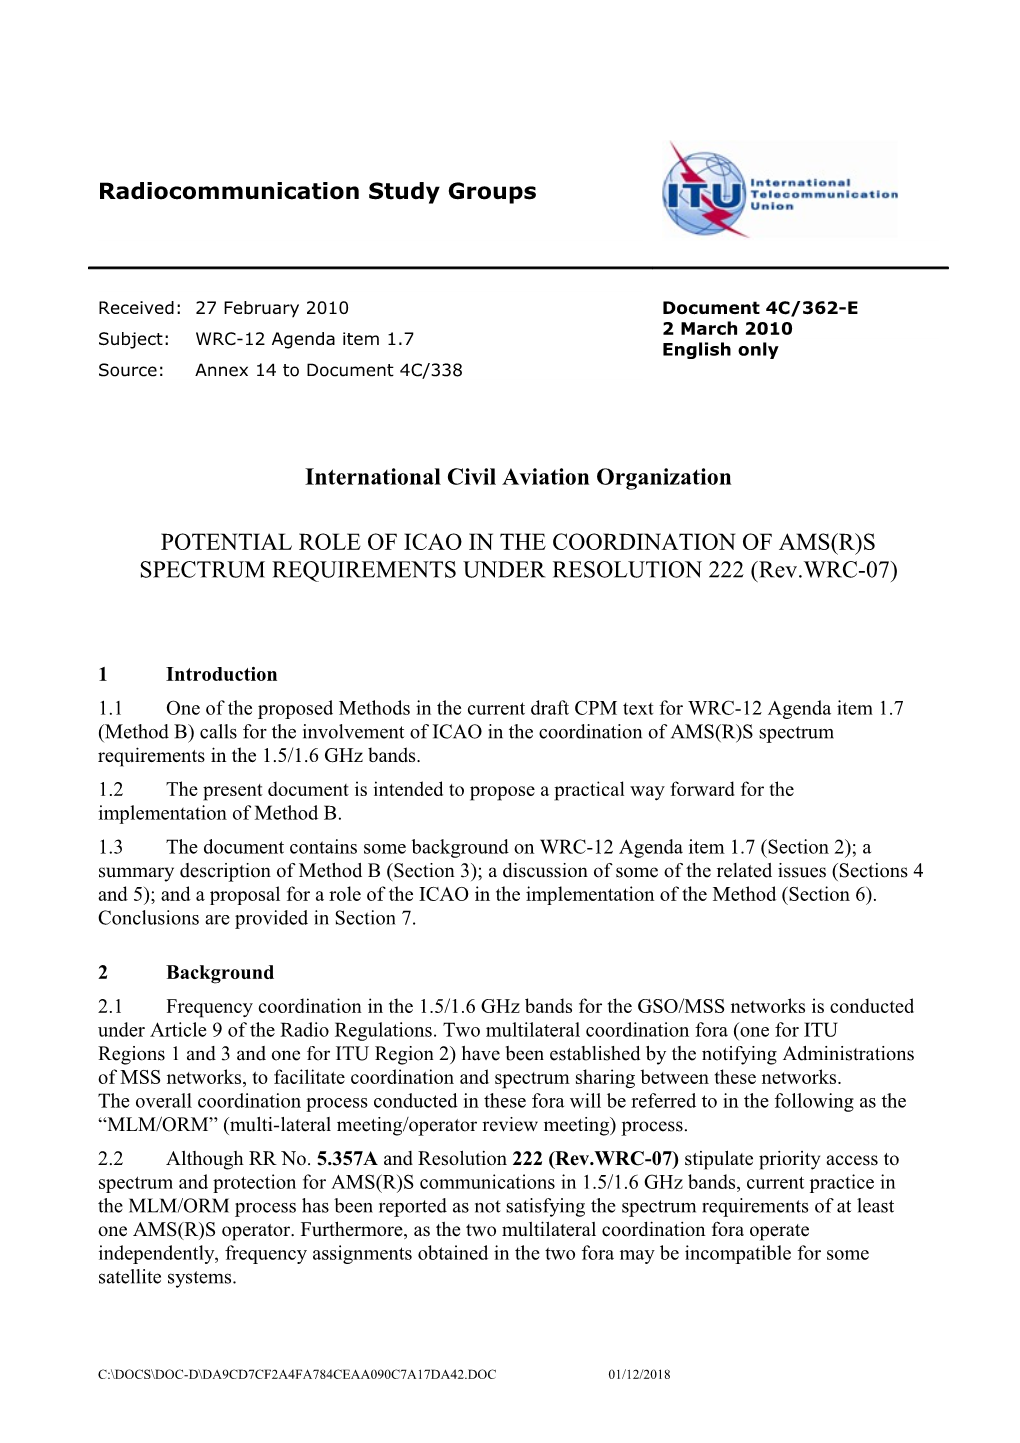 Potential Role of Icao in the Coordination of Ams(R)S Spectrum Requirements Under Resolution